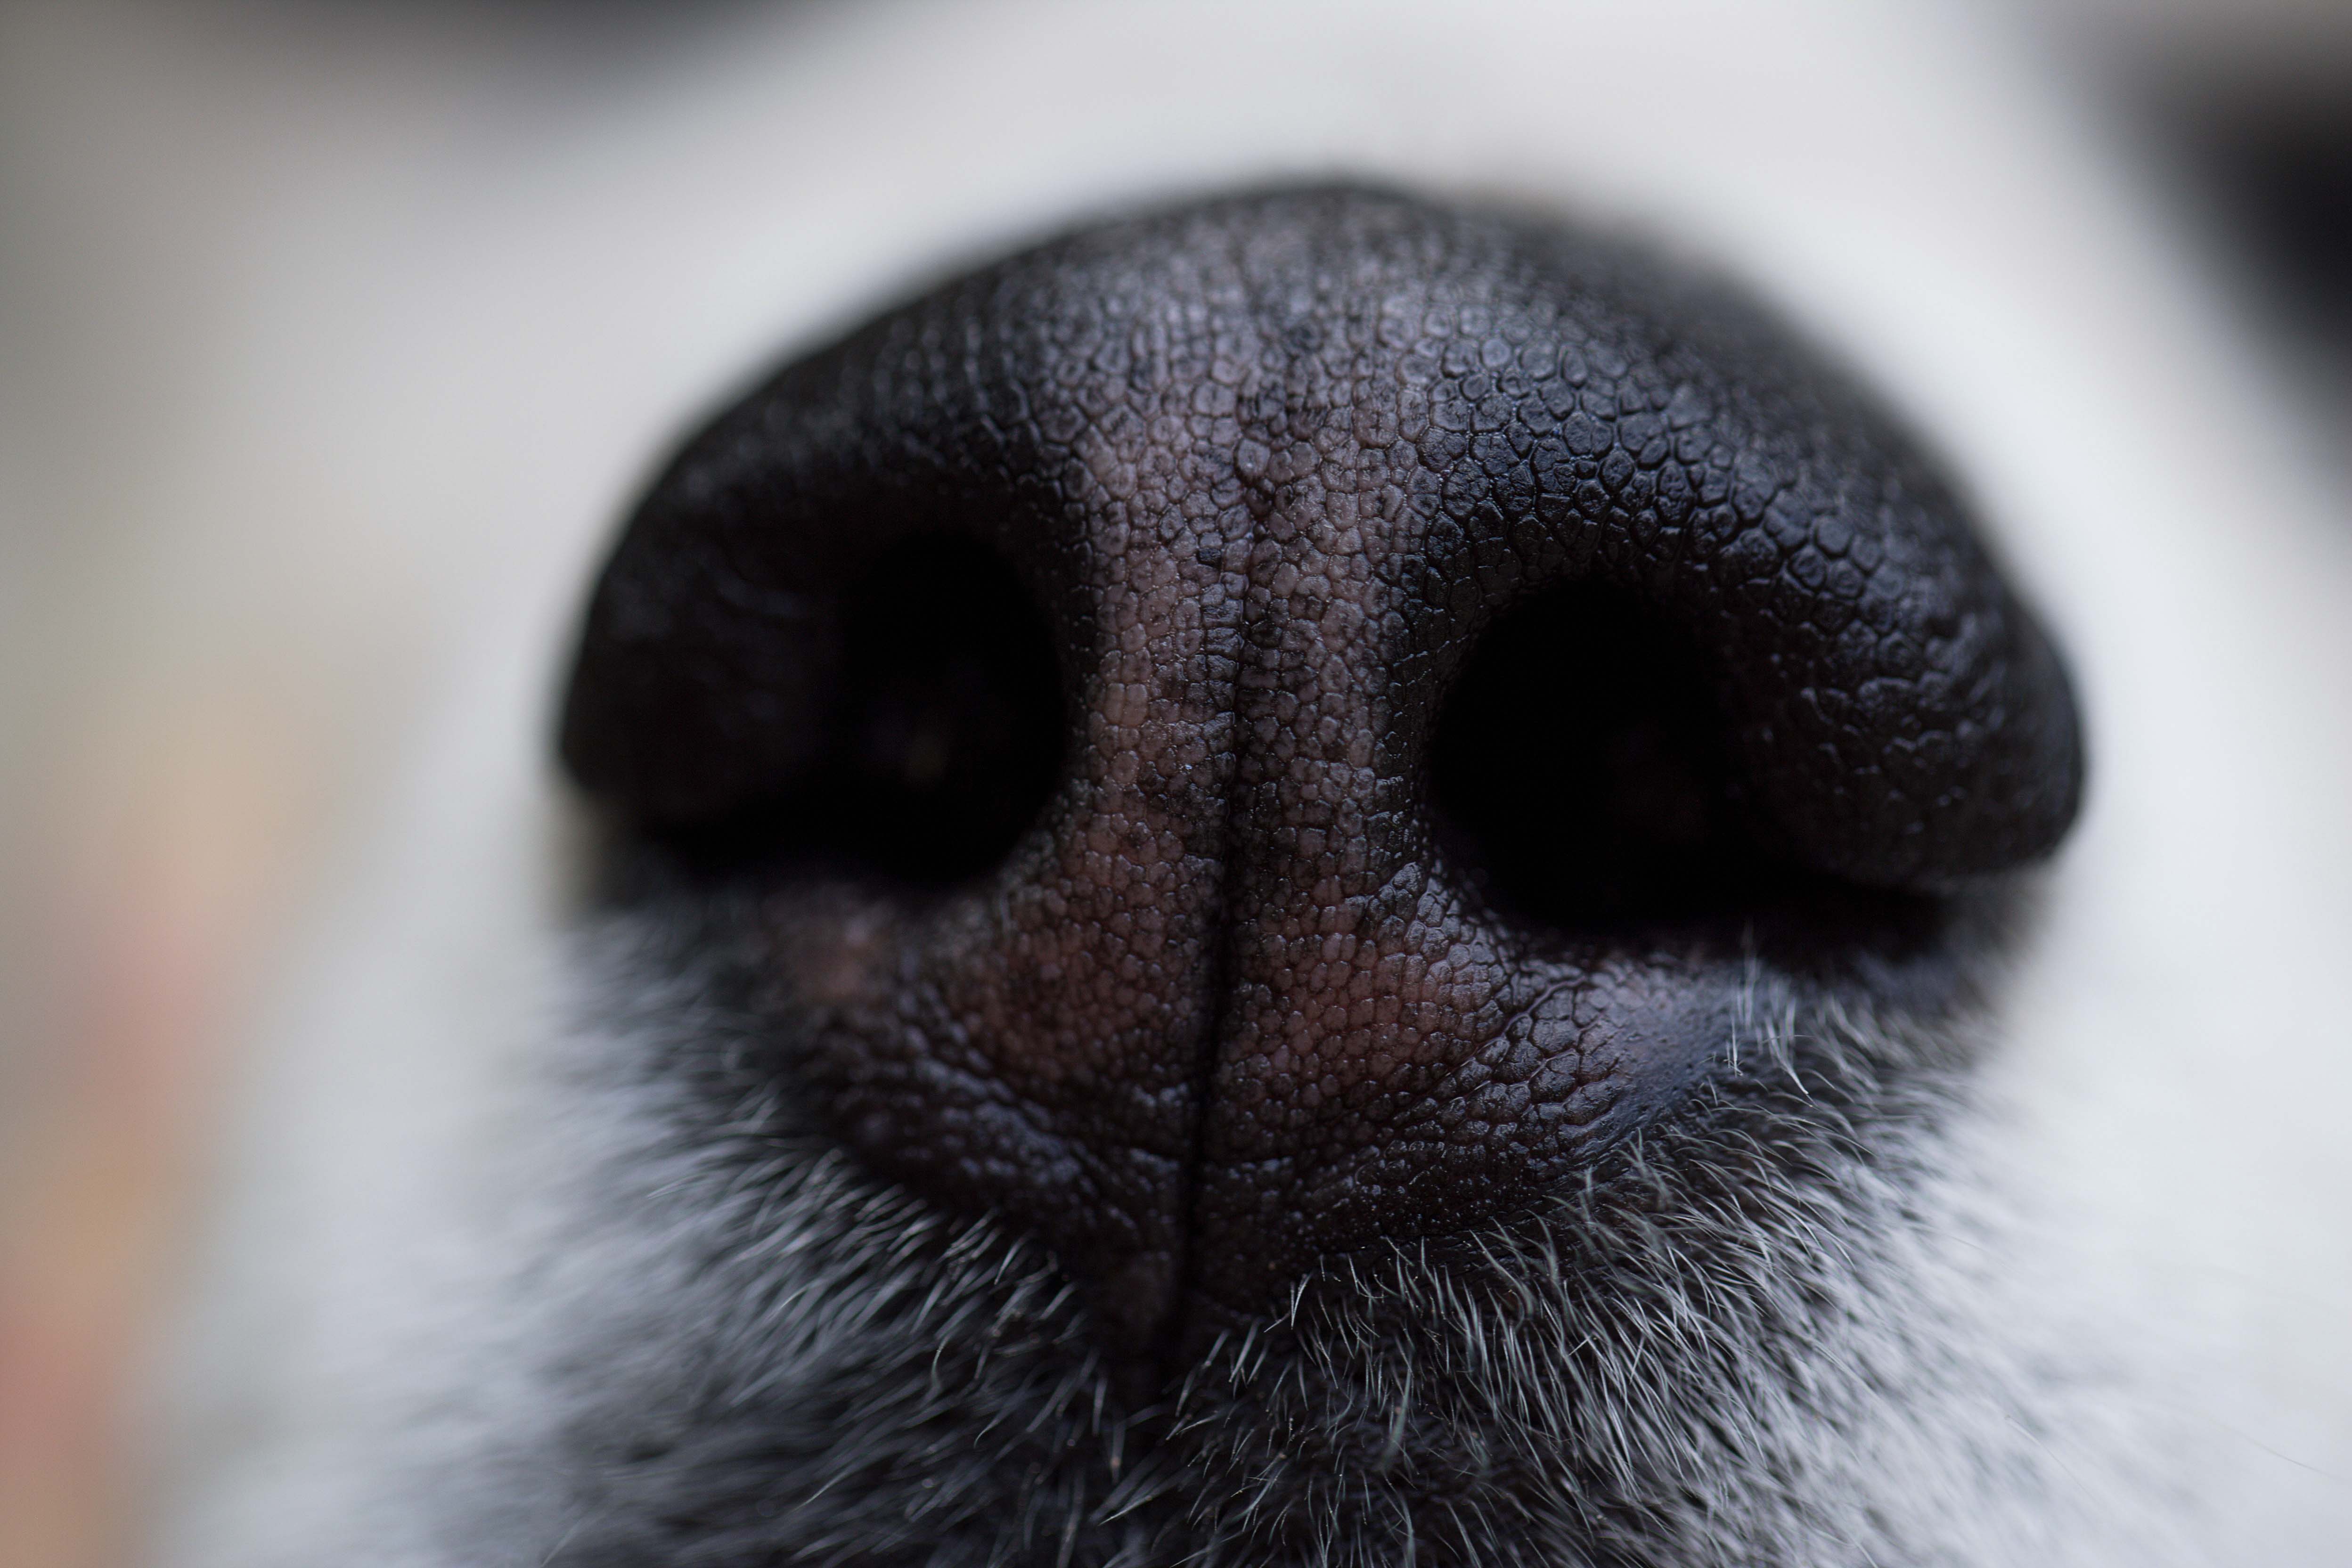 how long can dogs live with cancer